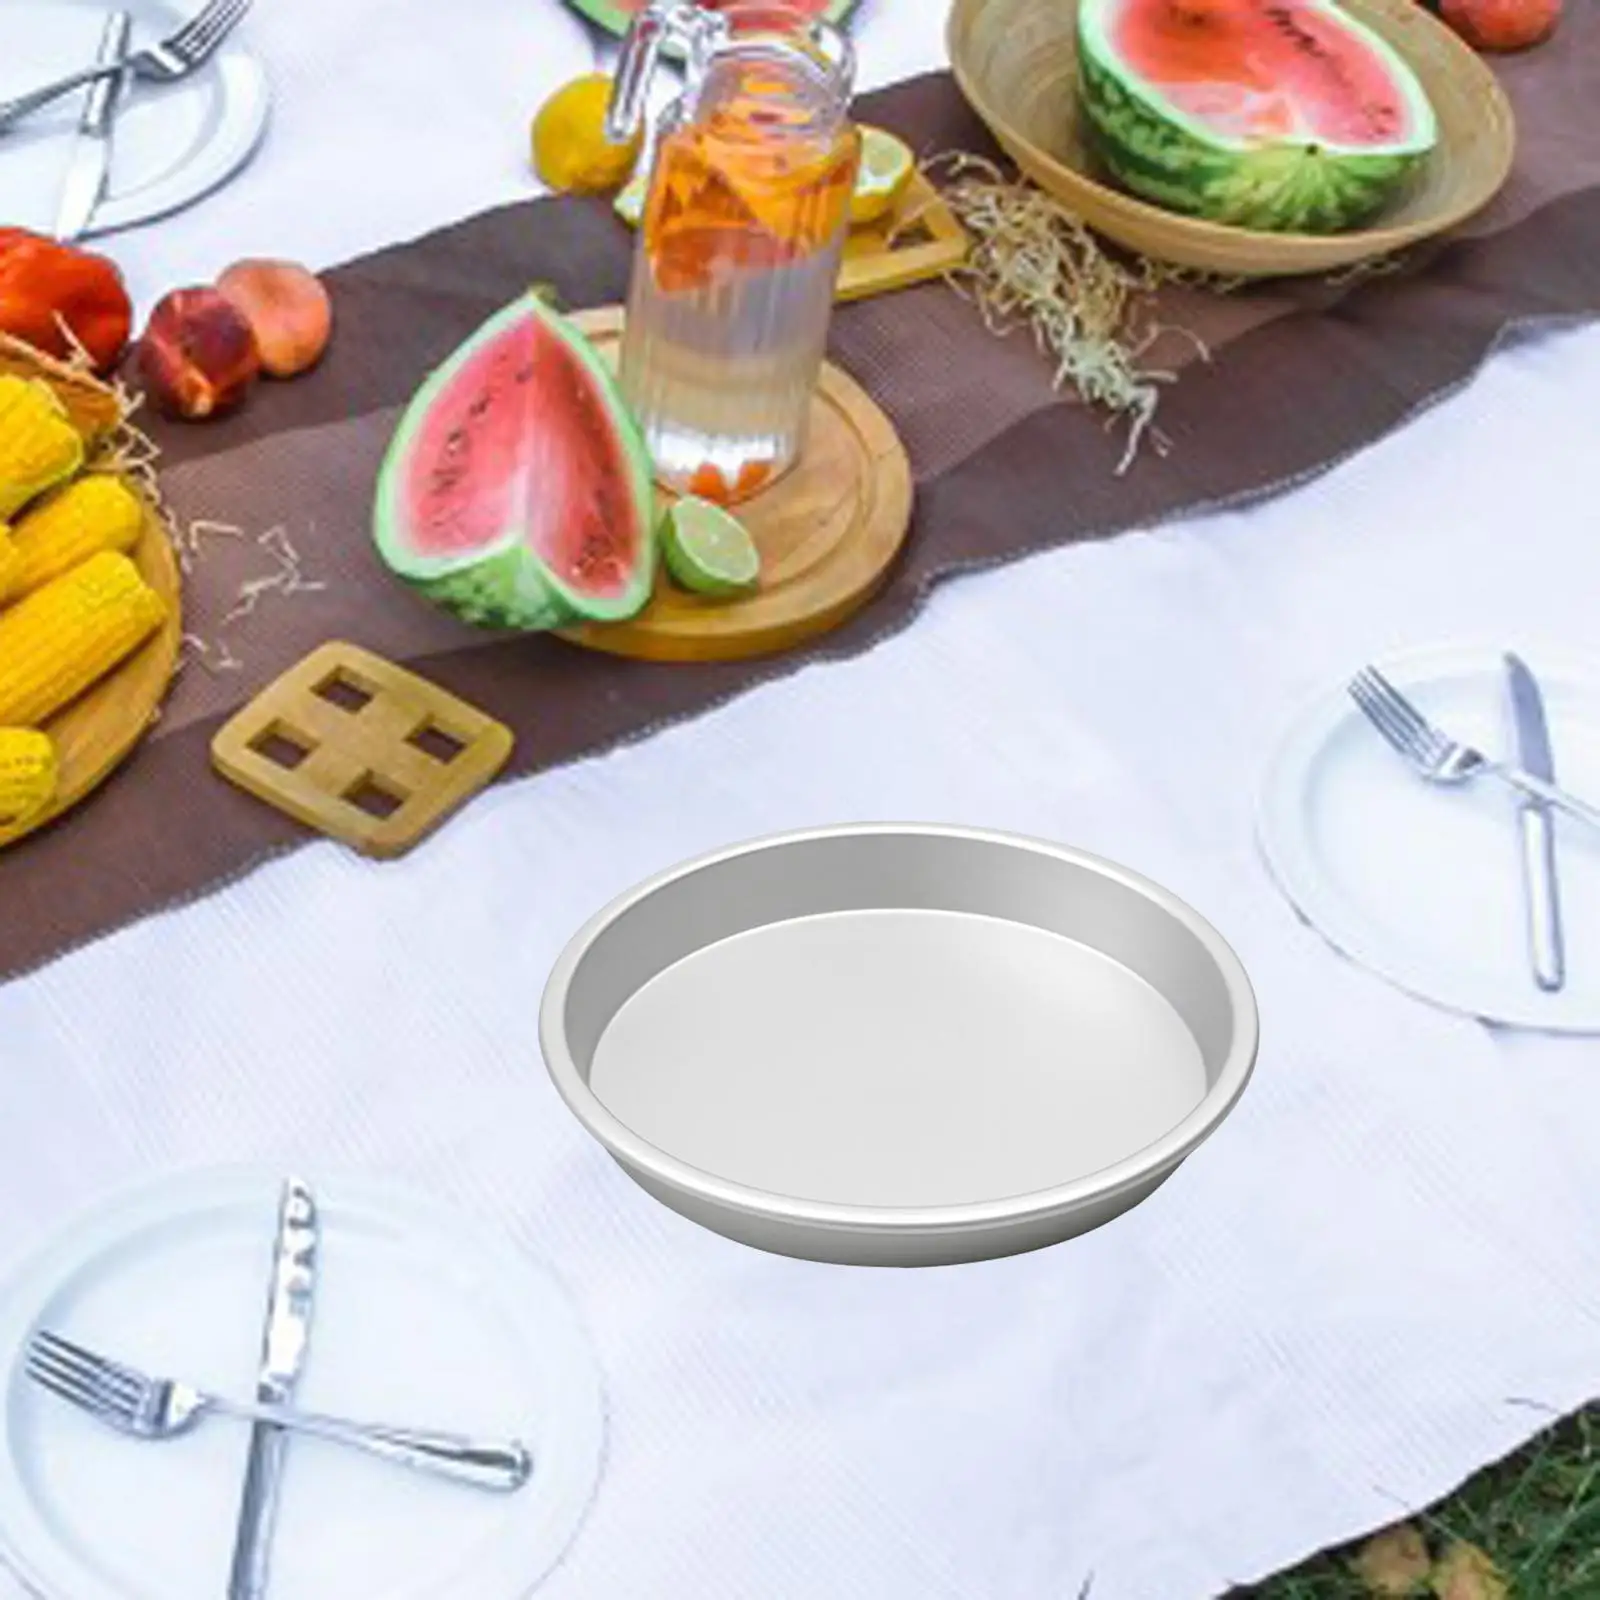 Camping Plate Aluminum Alloy Lightweight 8 Inches Portable Tableware Round Fruit Plate for Picnic Kitchen Hiking BBQ Outdoor